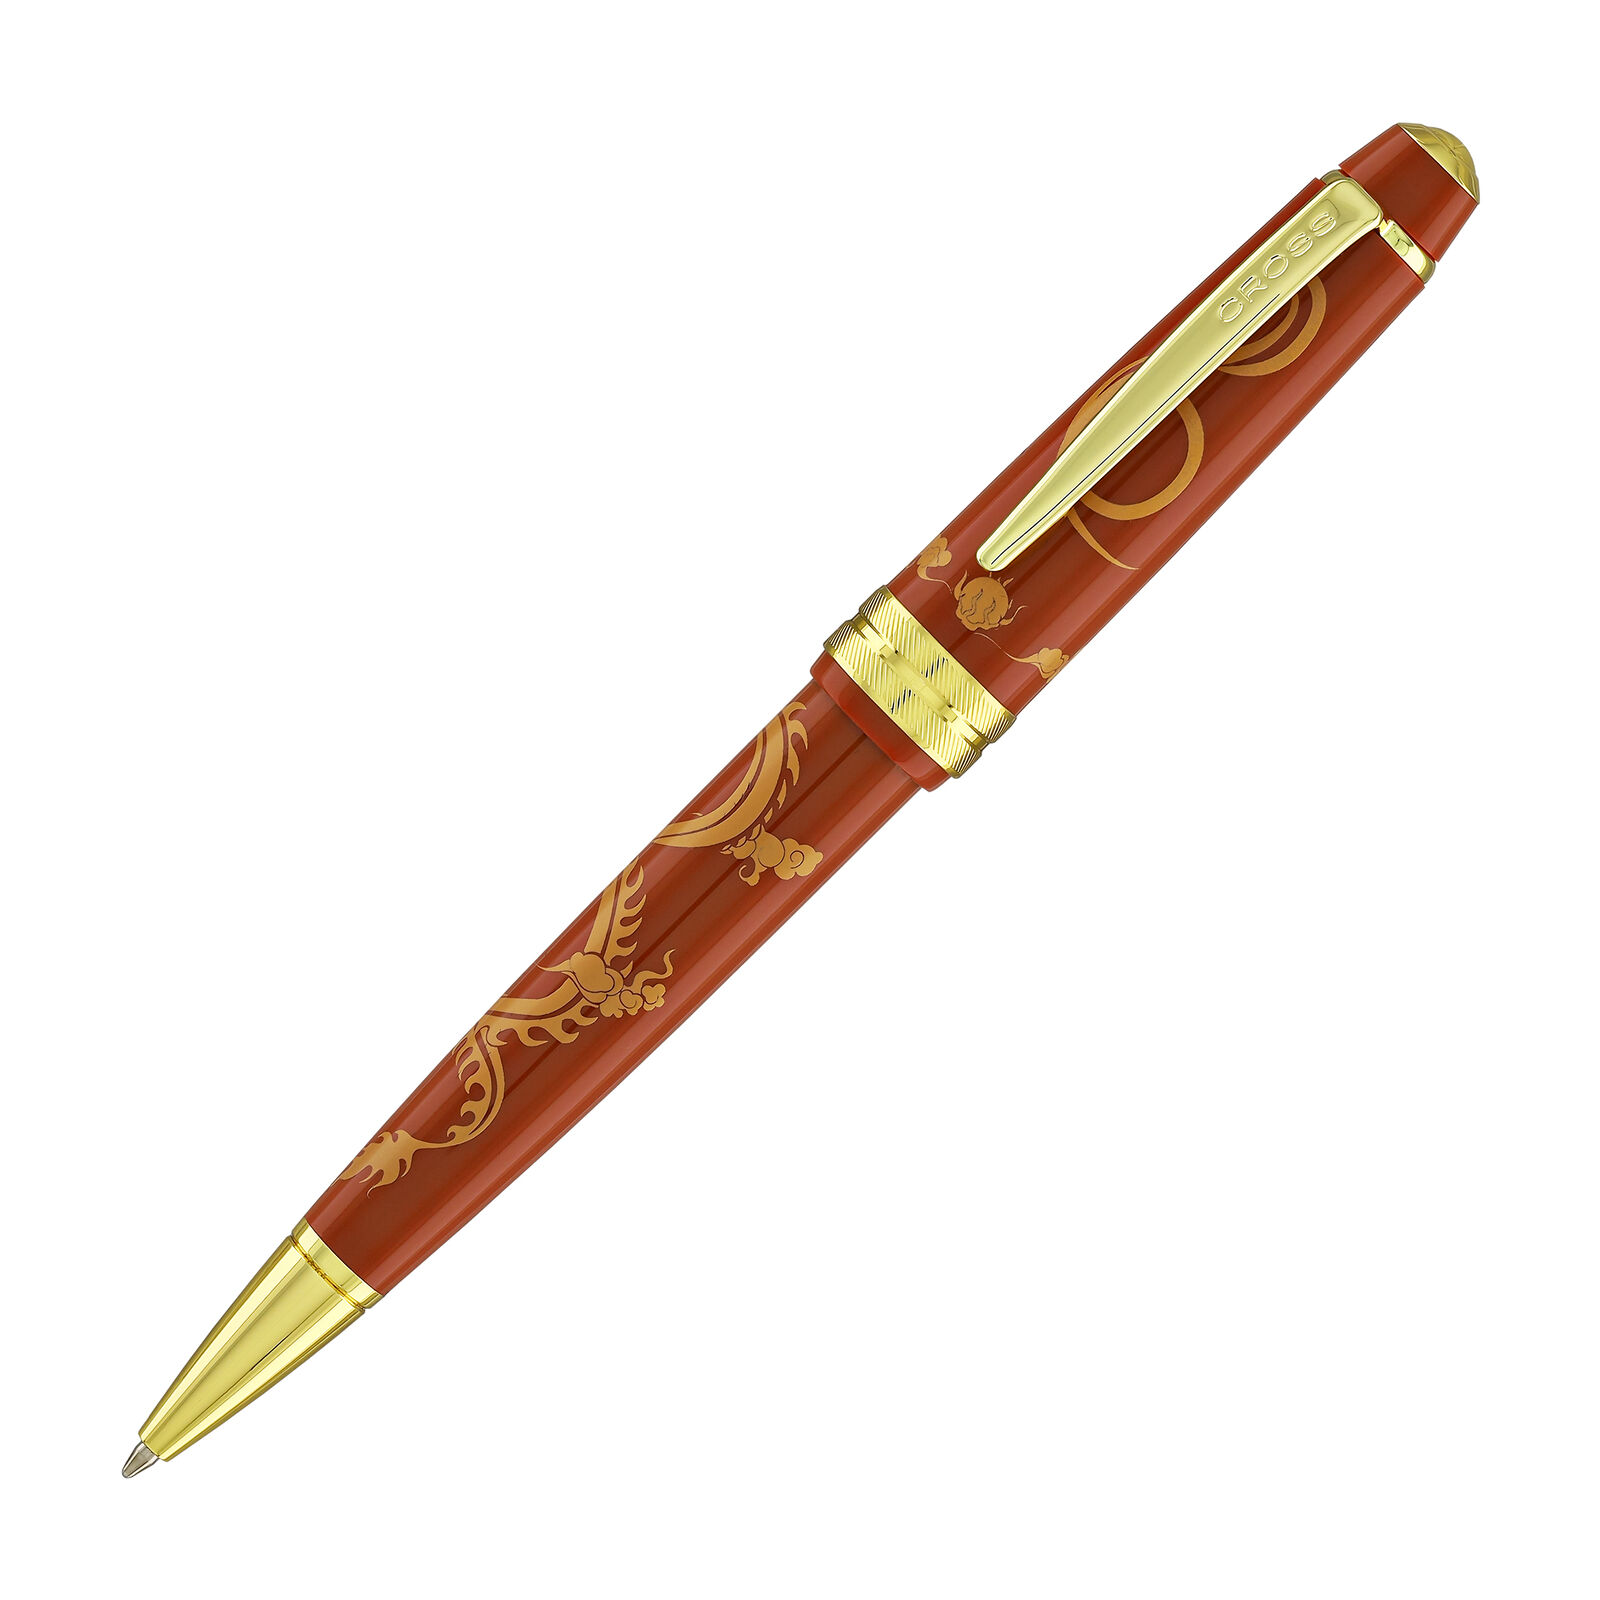 Cross Bailey Light Year of the Dragon Ballpoint Pen in Polished Amber Resin GT